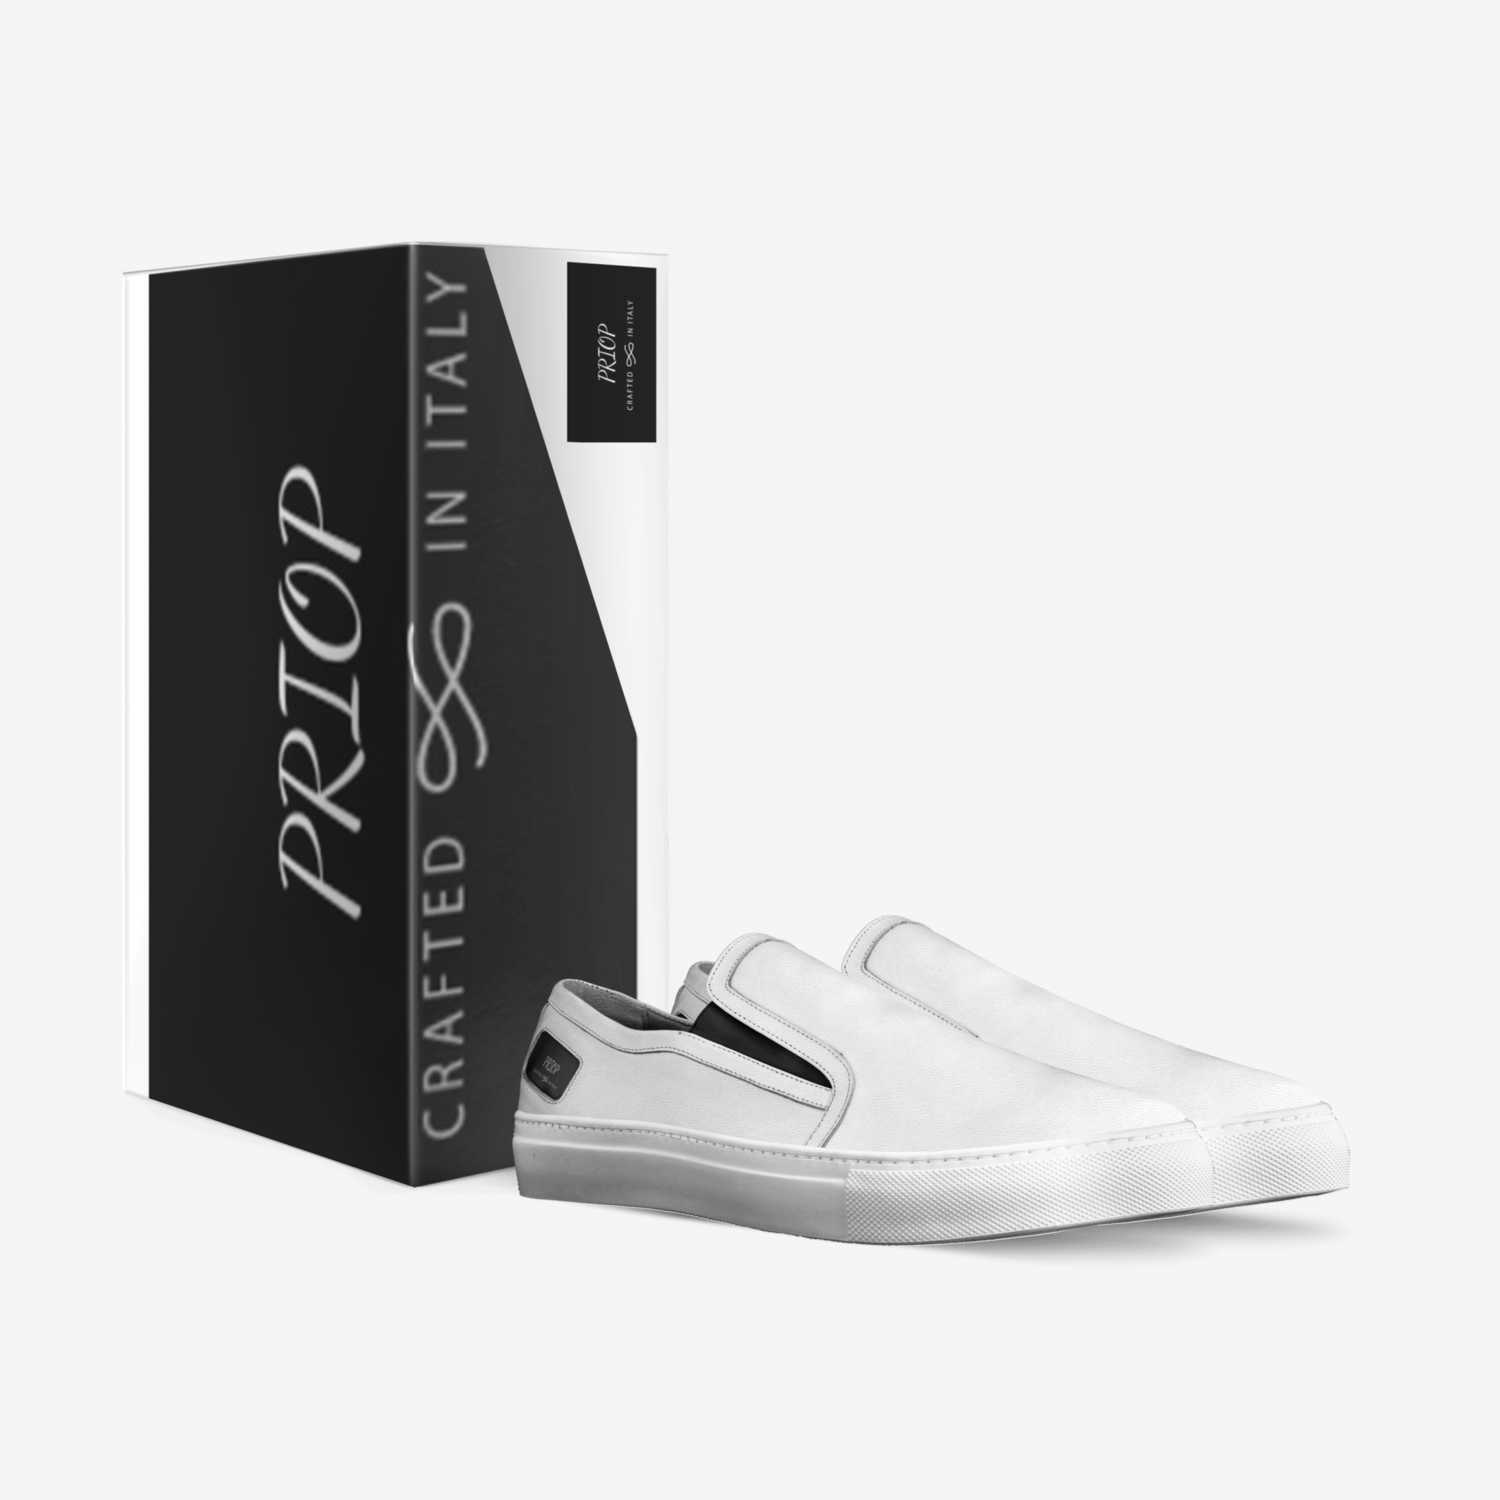 PRIOP custom made in Italy shoes by Thepriopgroup.riddick | Box view